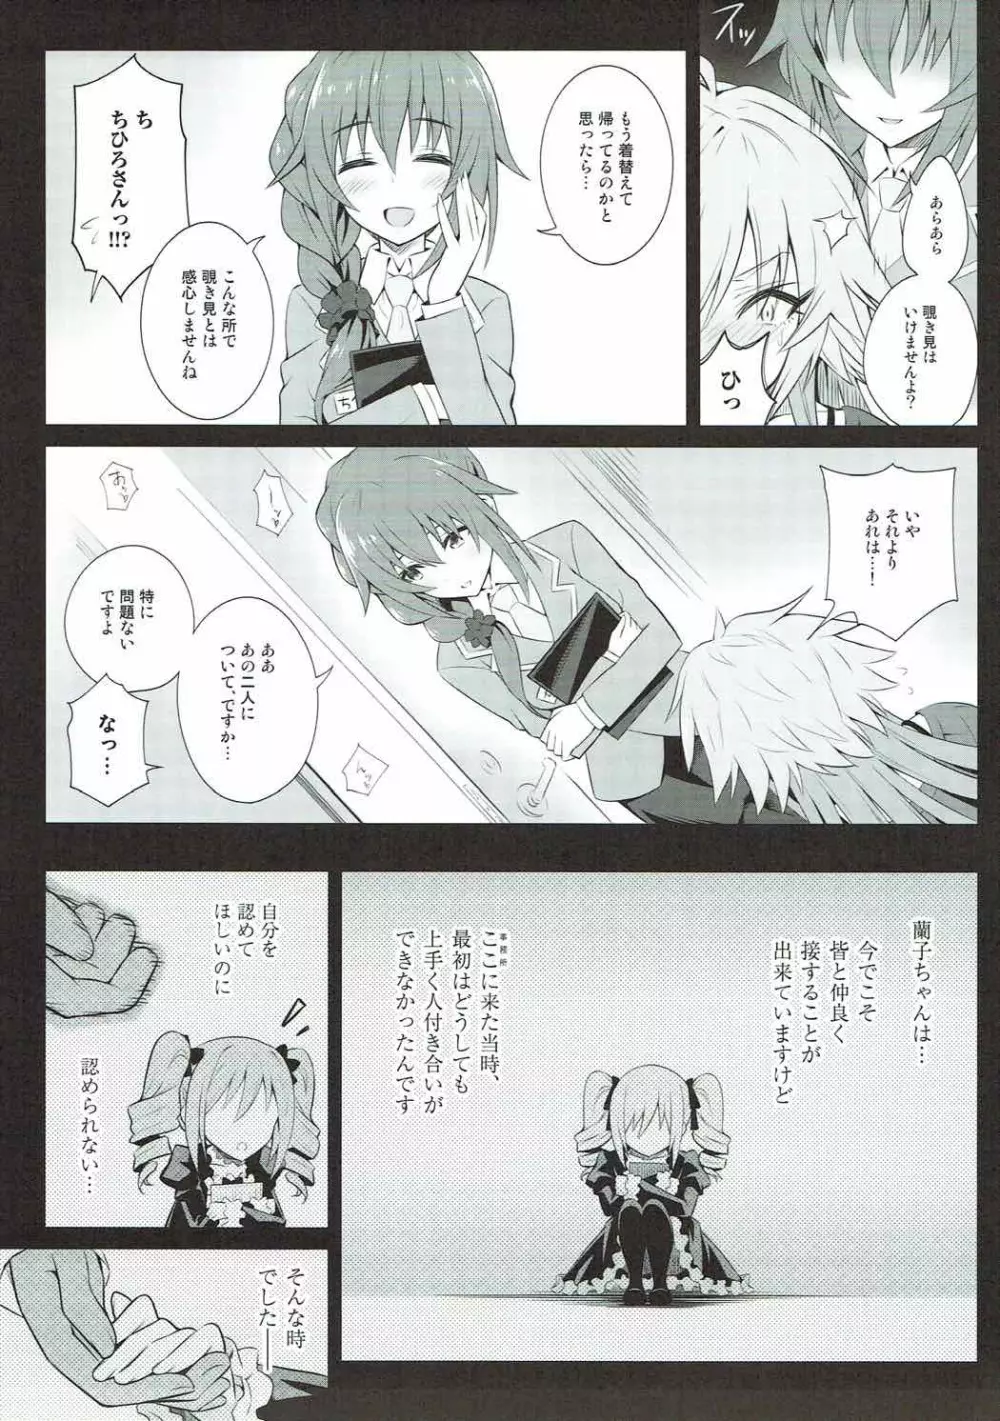 The Resonant Notes -共鳴世界の旋律符牒- - page6